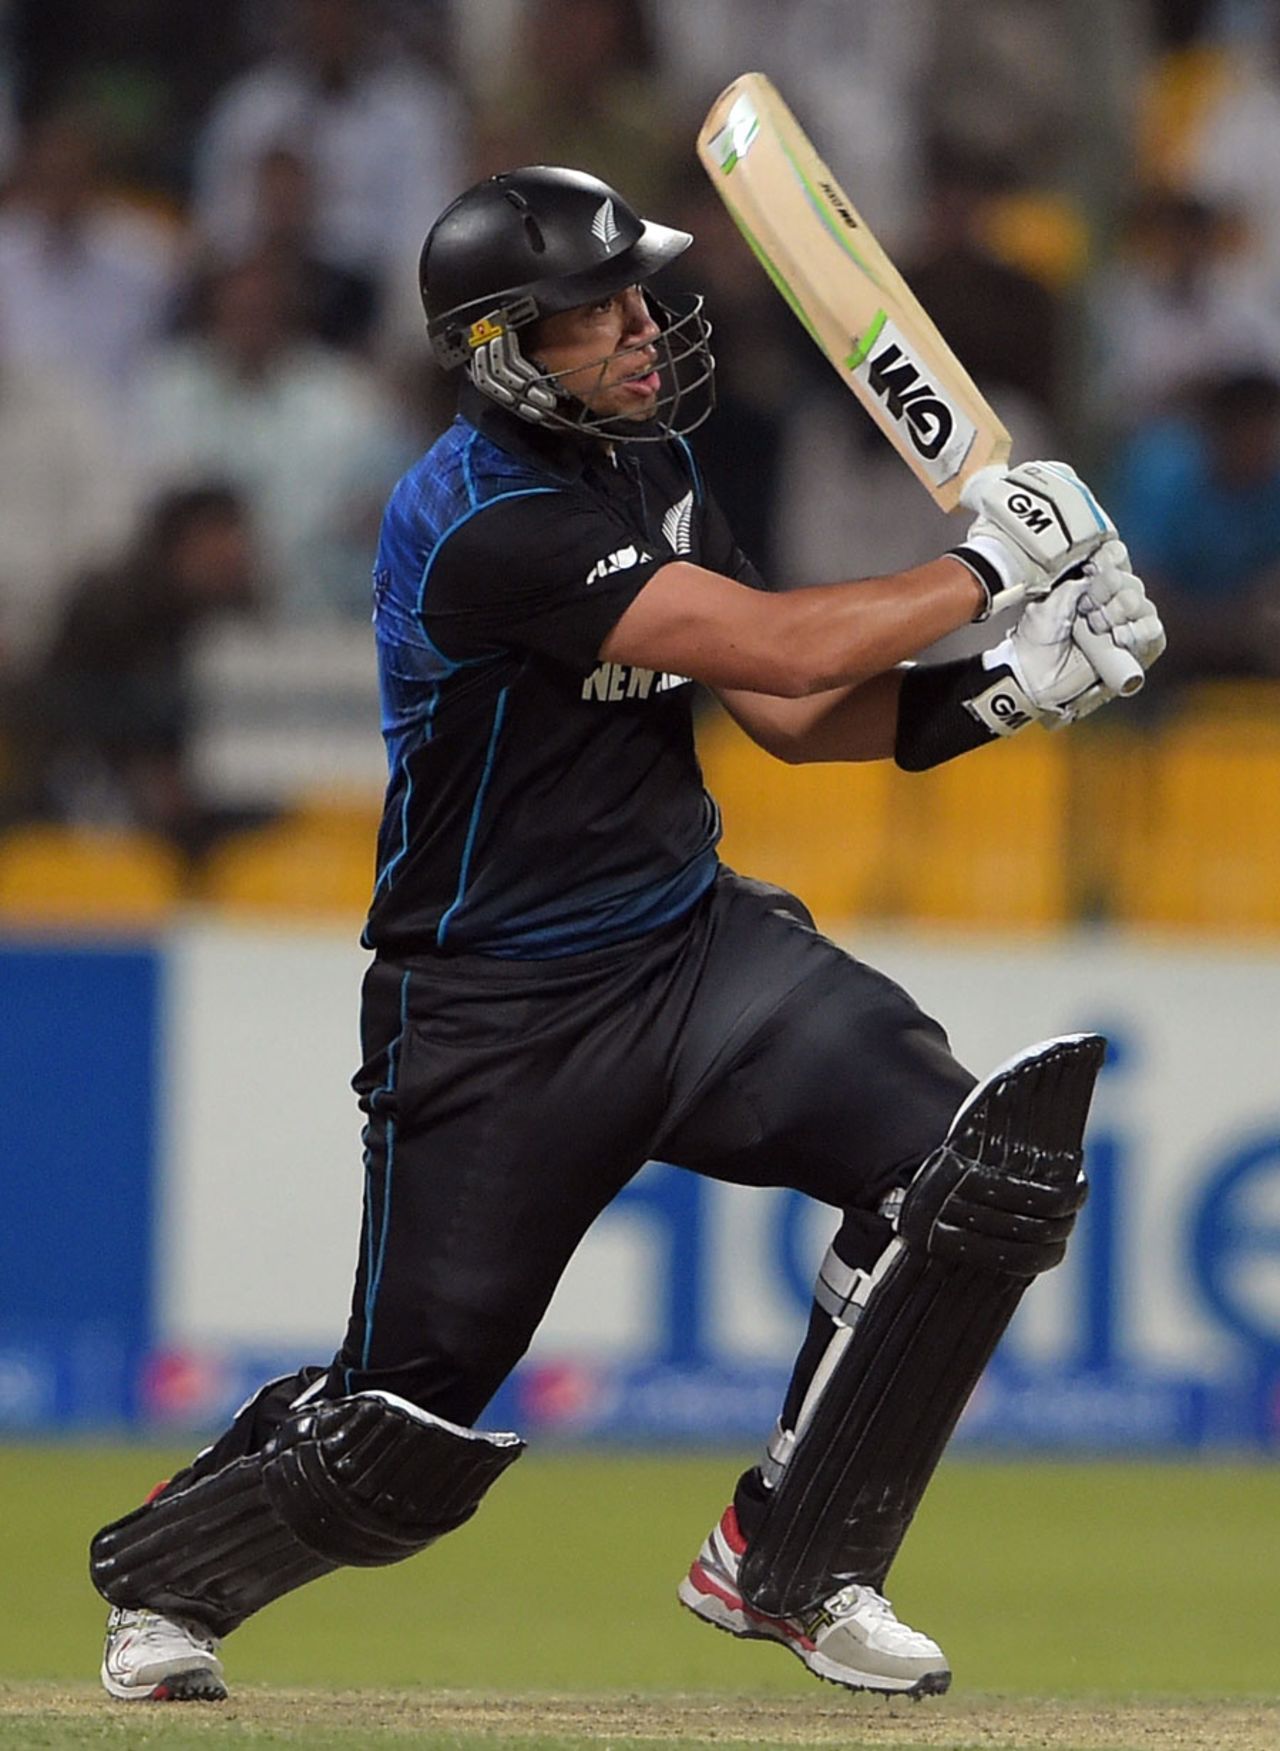 Ross Taylor flicks one away during his 88 not out, Pakistan v New Zealand, 5th ODI, Abu Dhabi, December 19, 2014